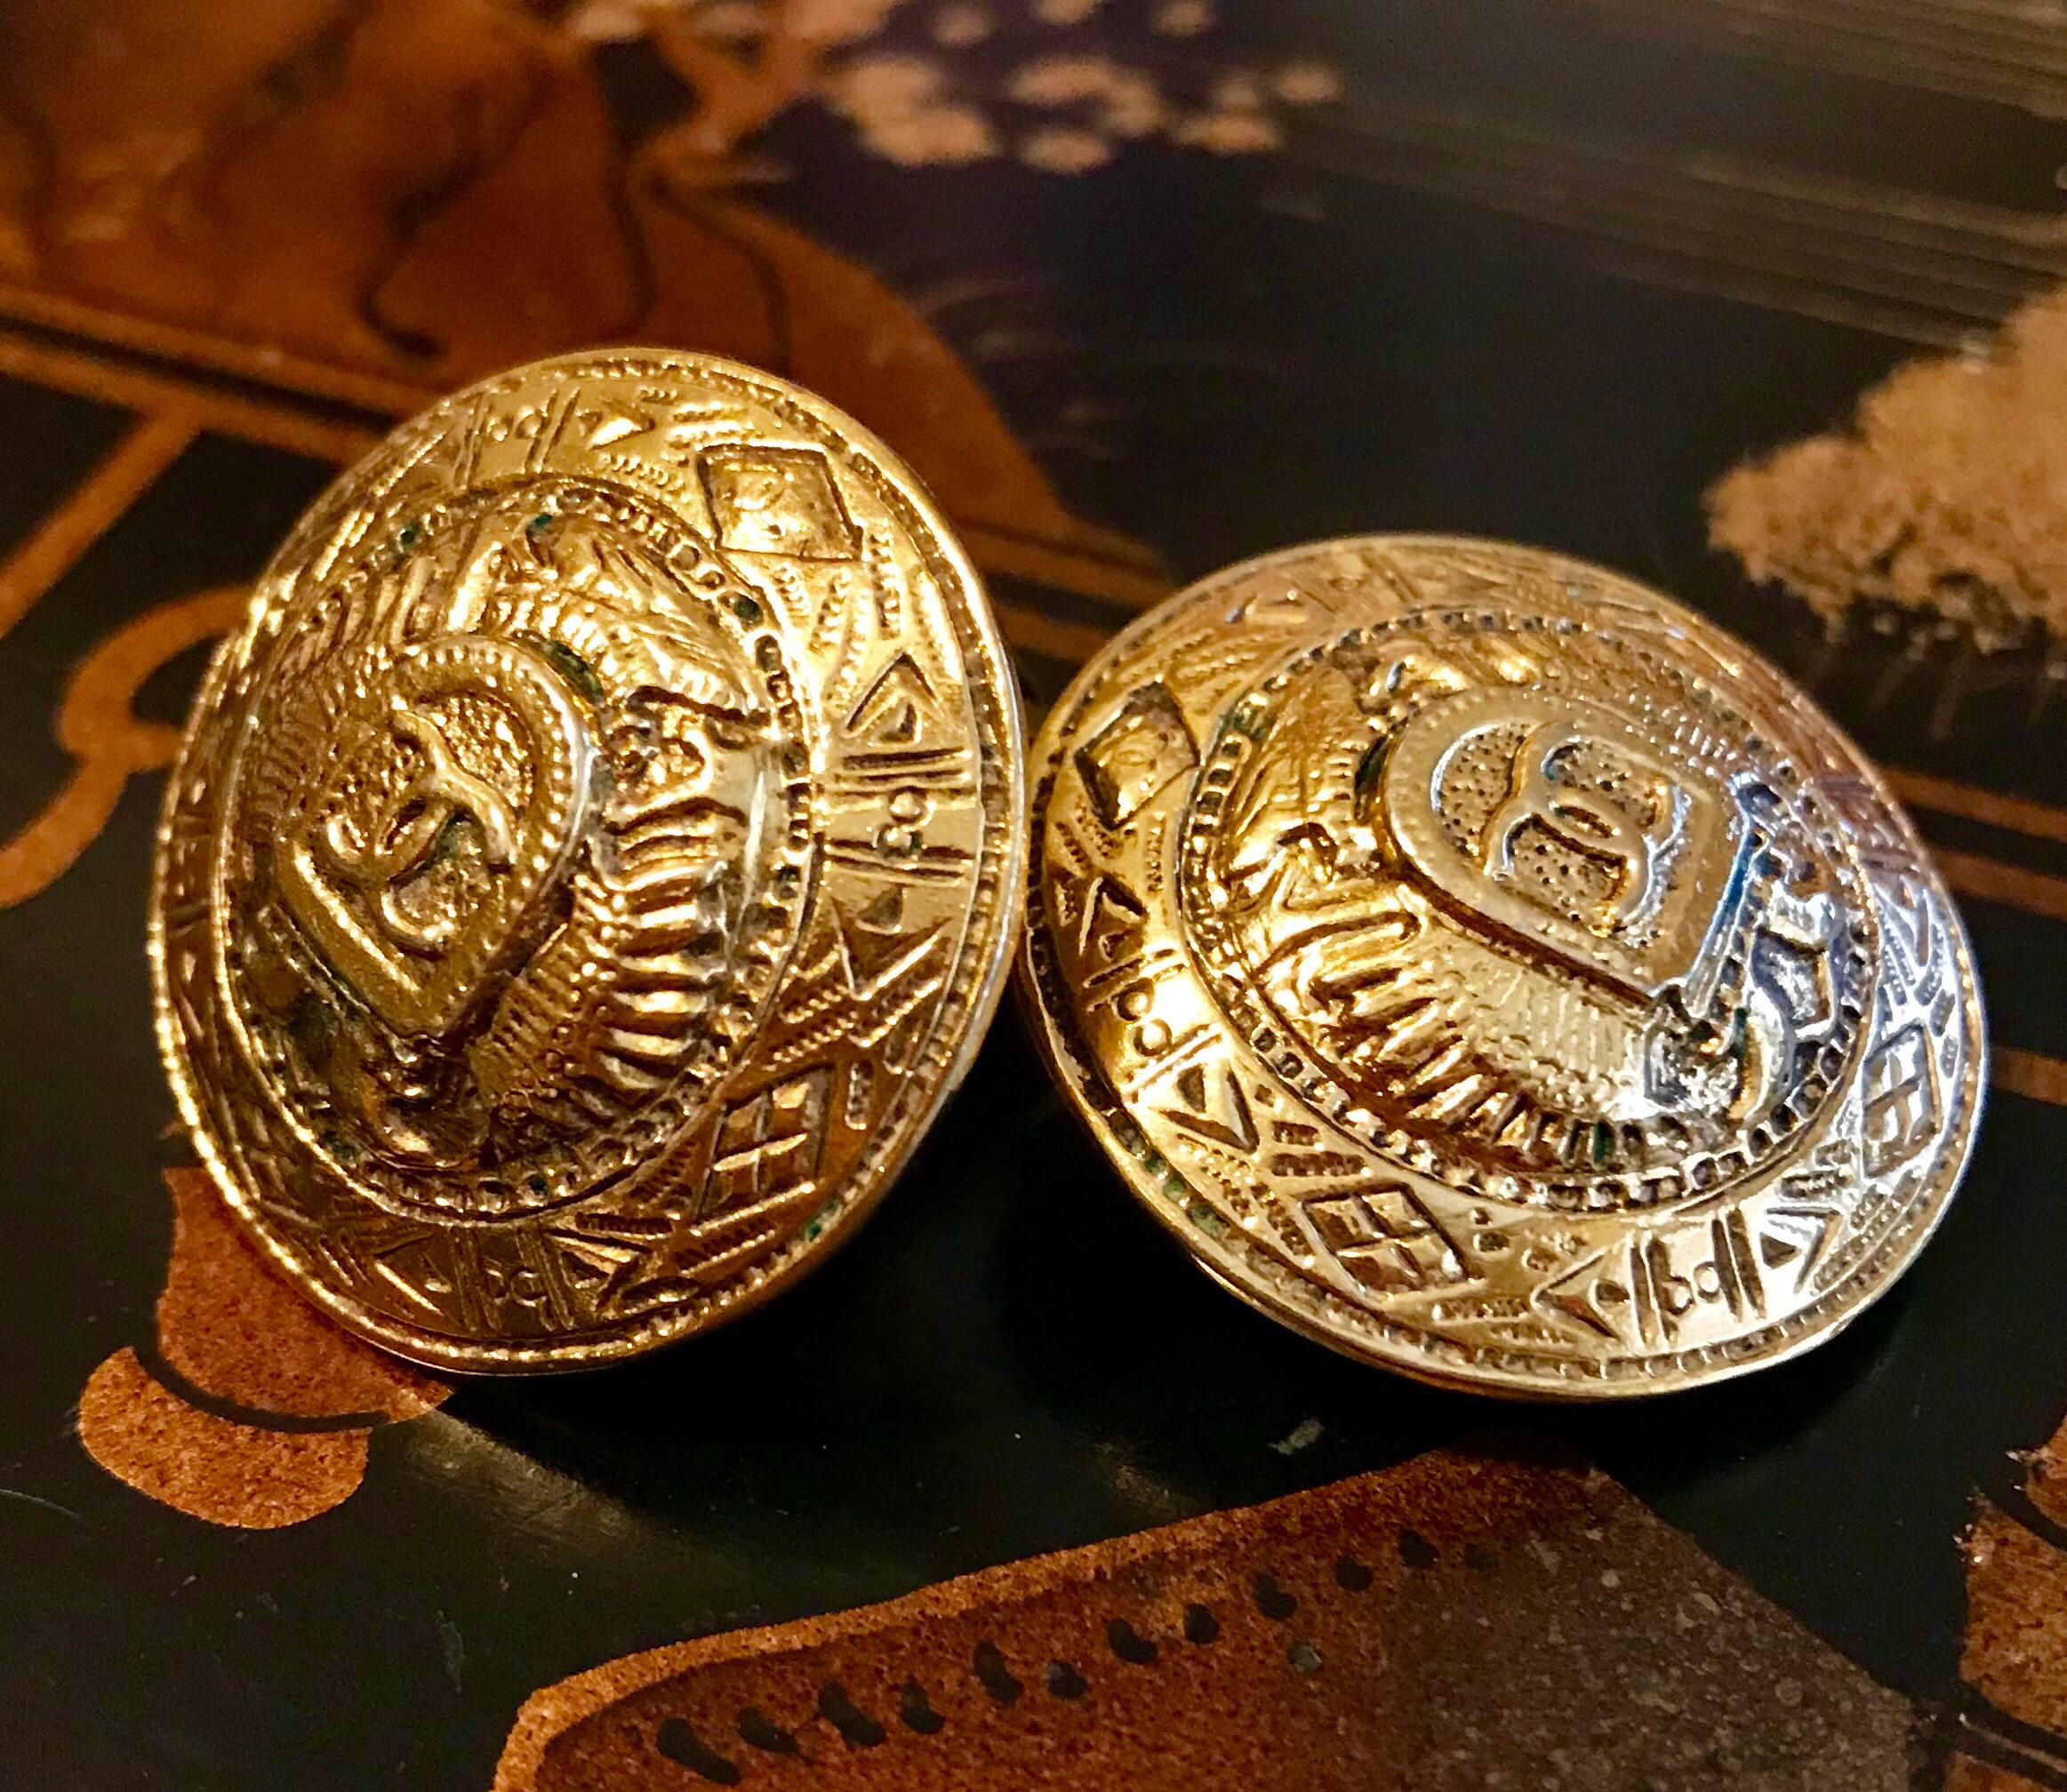 Circa 1980s Chanel round goldtone metal clip back earrings embellished with shields and eagles.  Each earring measures 1.13